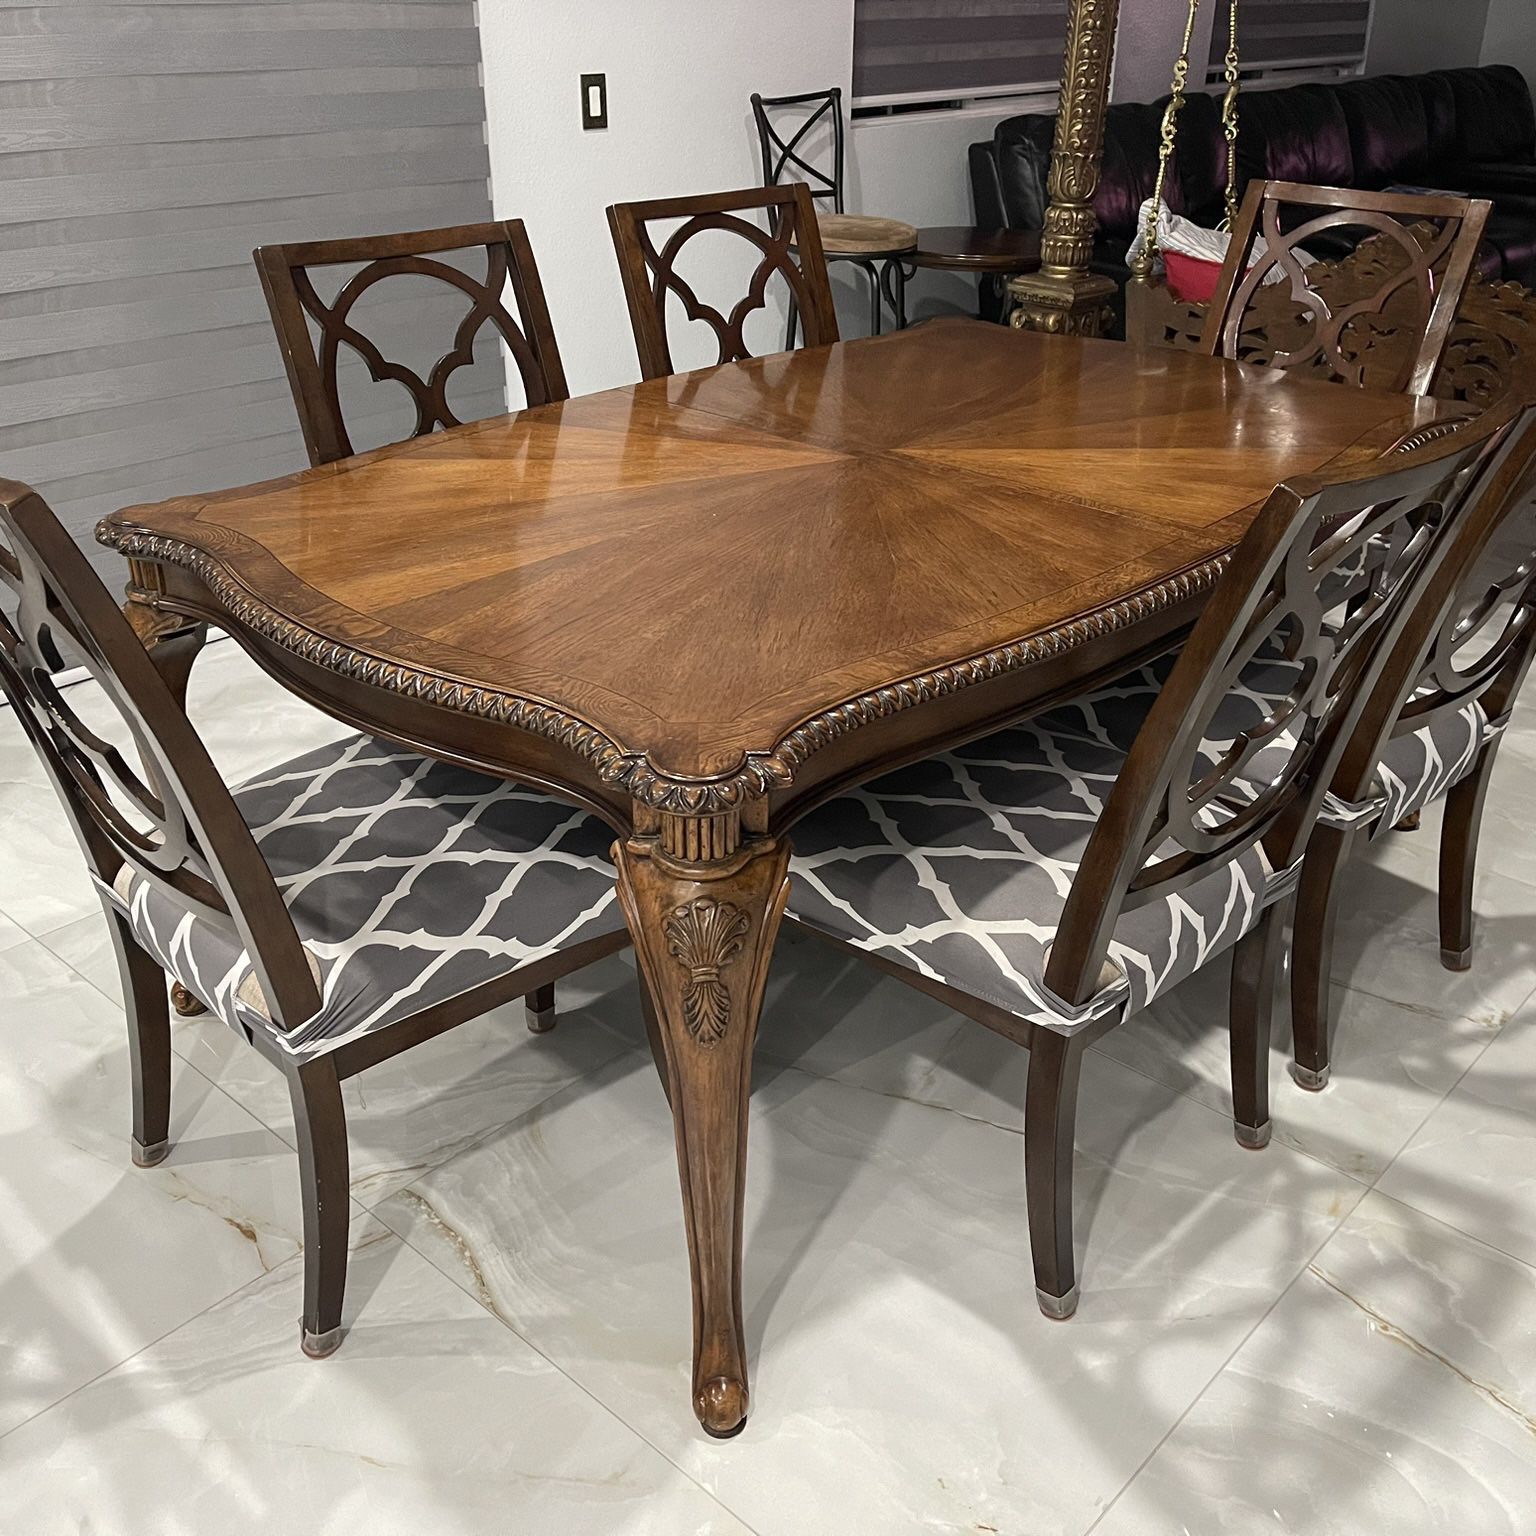 Heavy Dining Table With 6 Chairs 